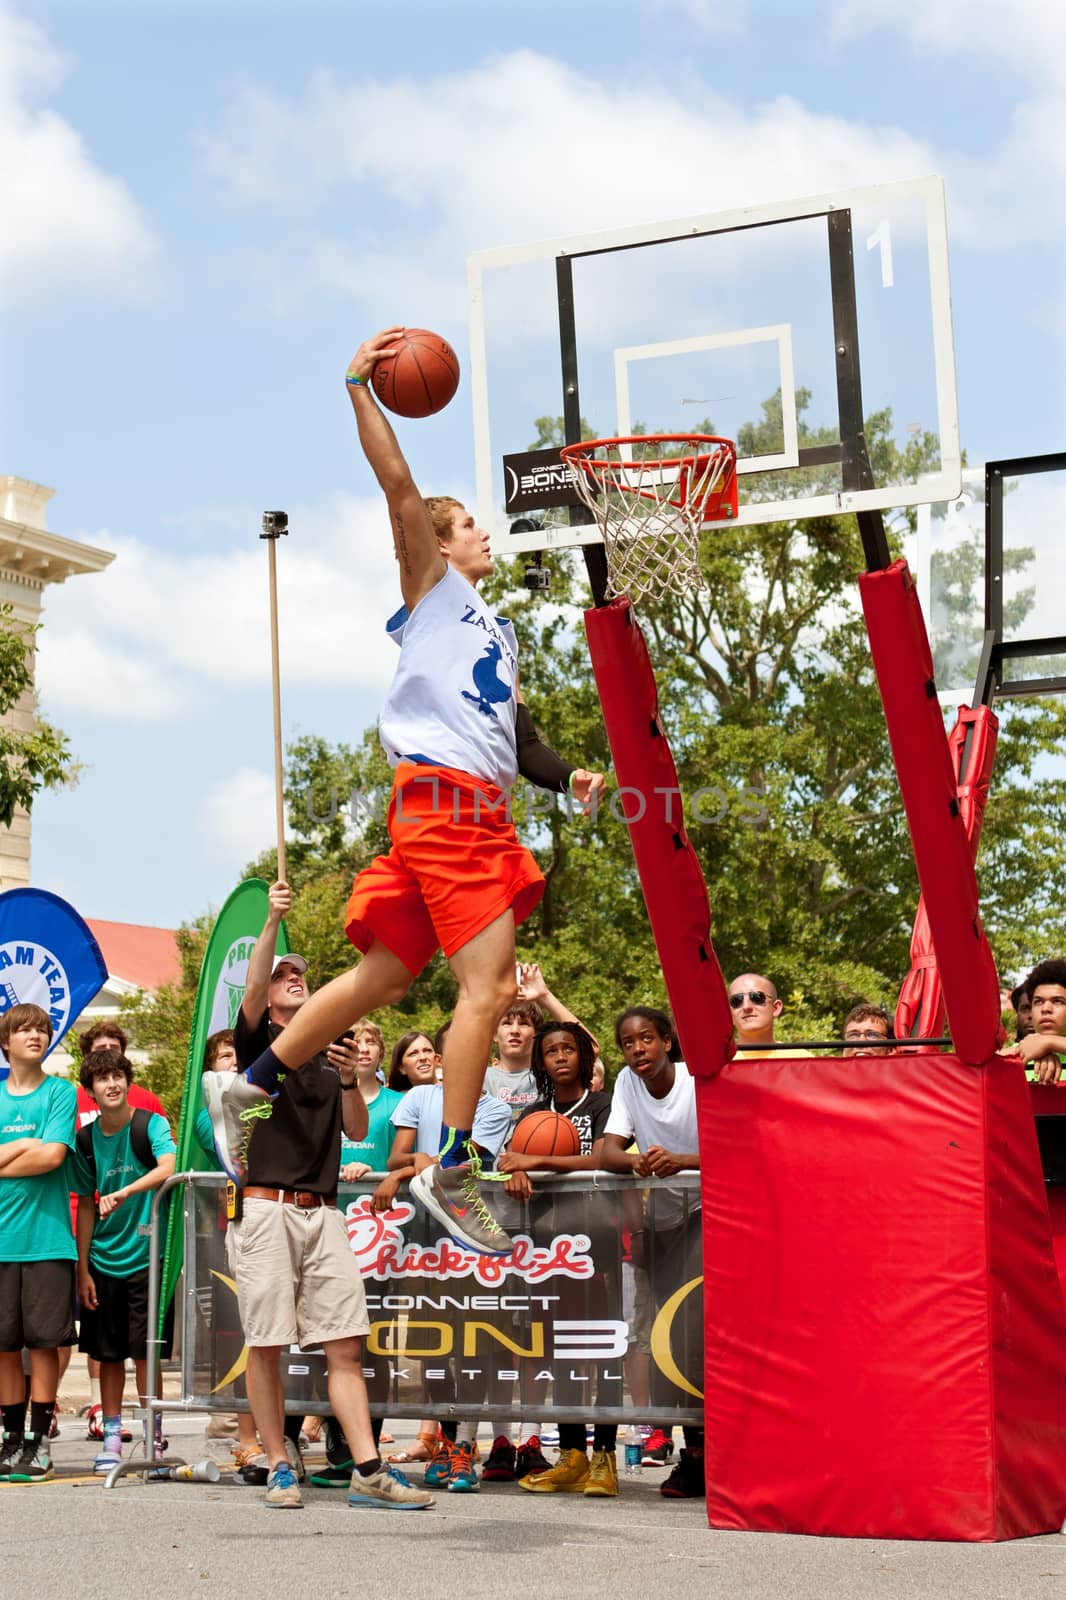 Young Man Leaps High In Outdoor Slam Dunk Contest by BluIz60